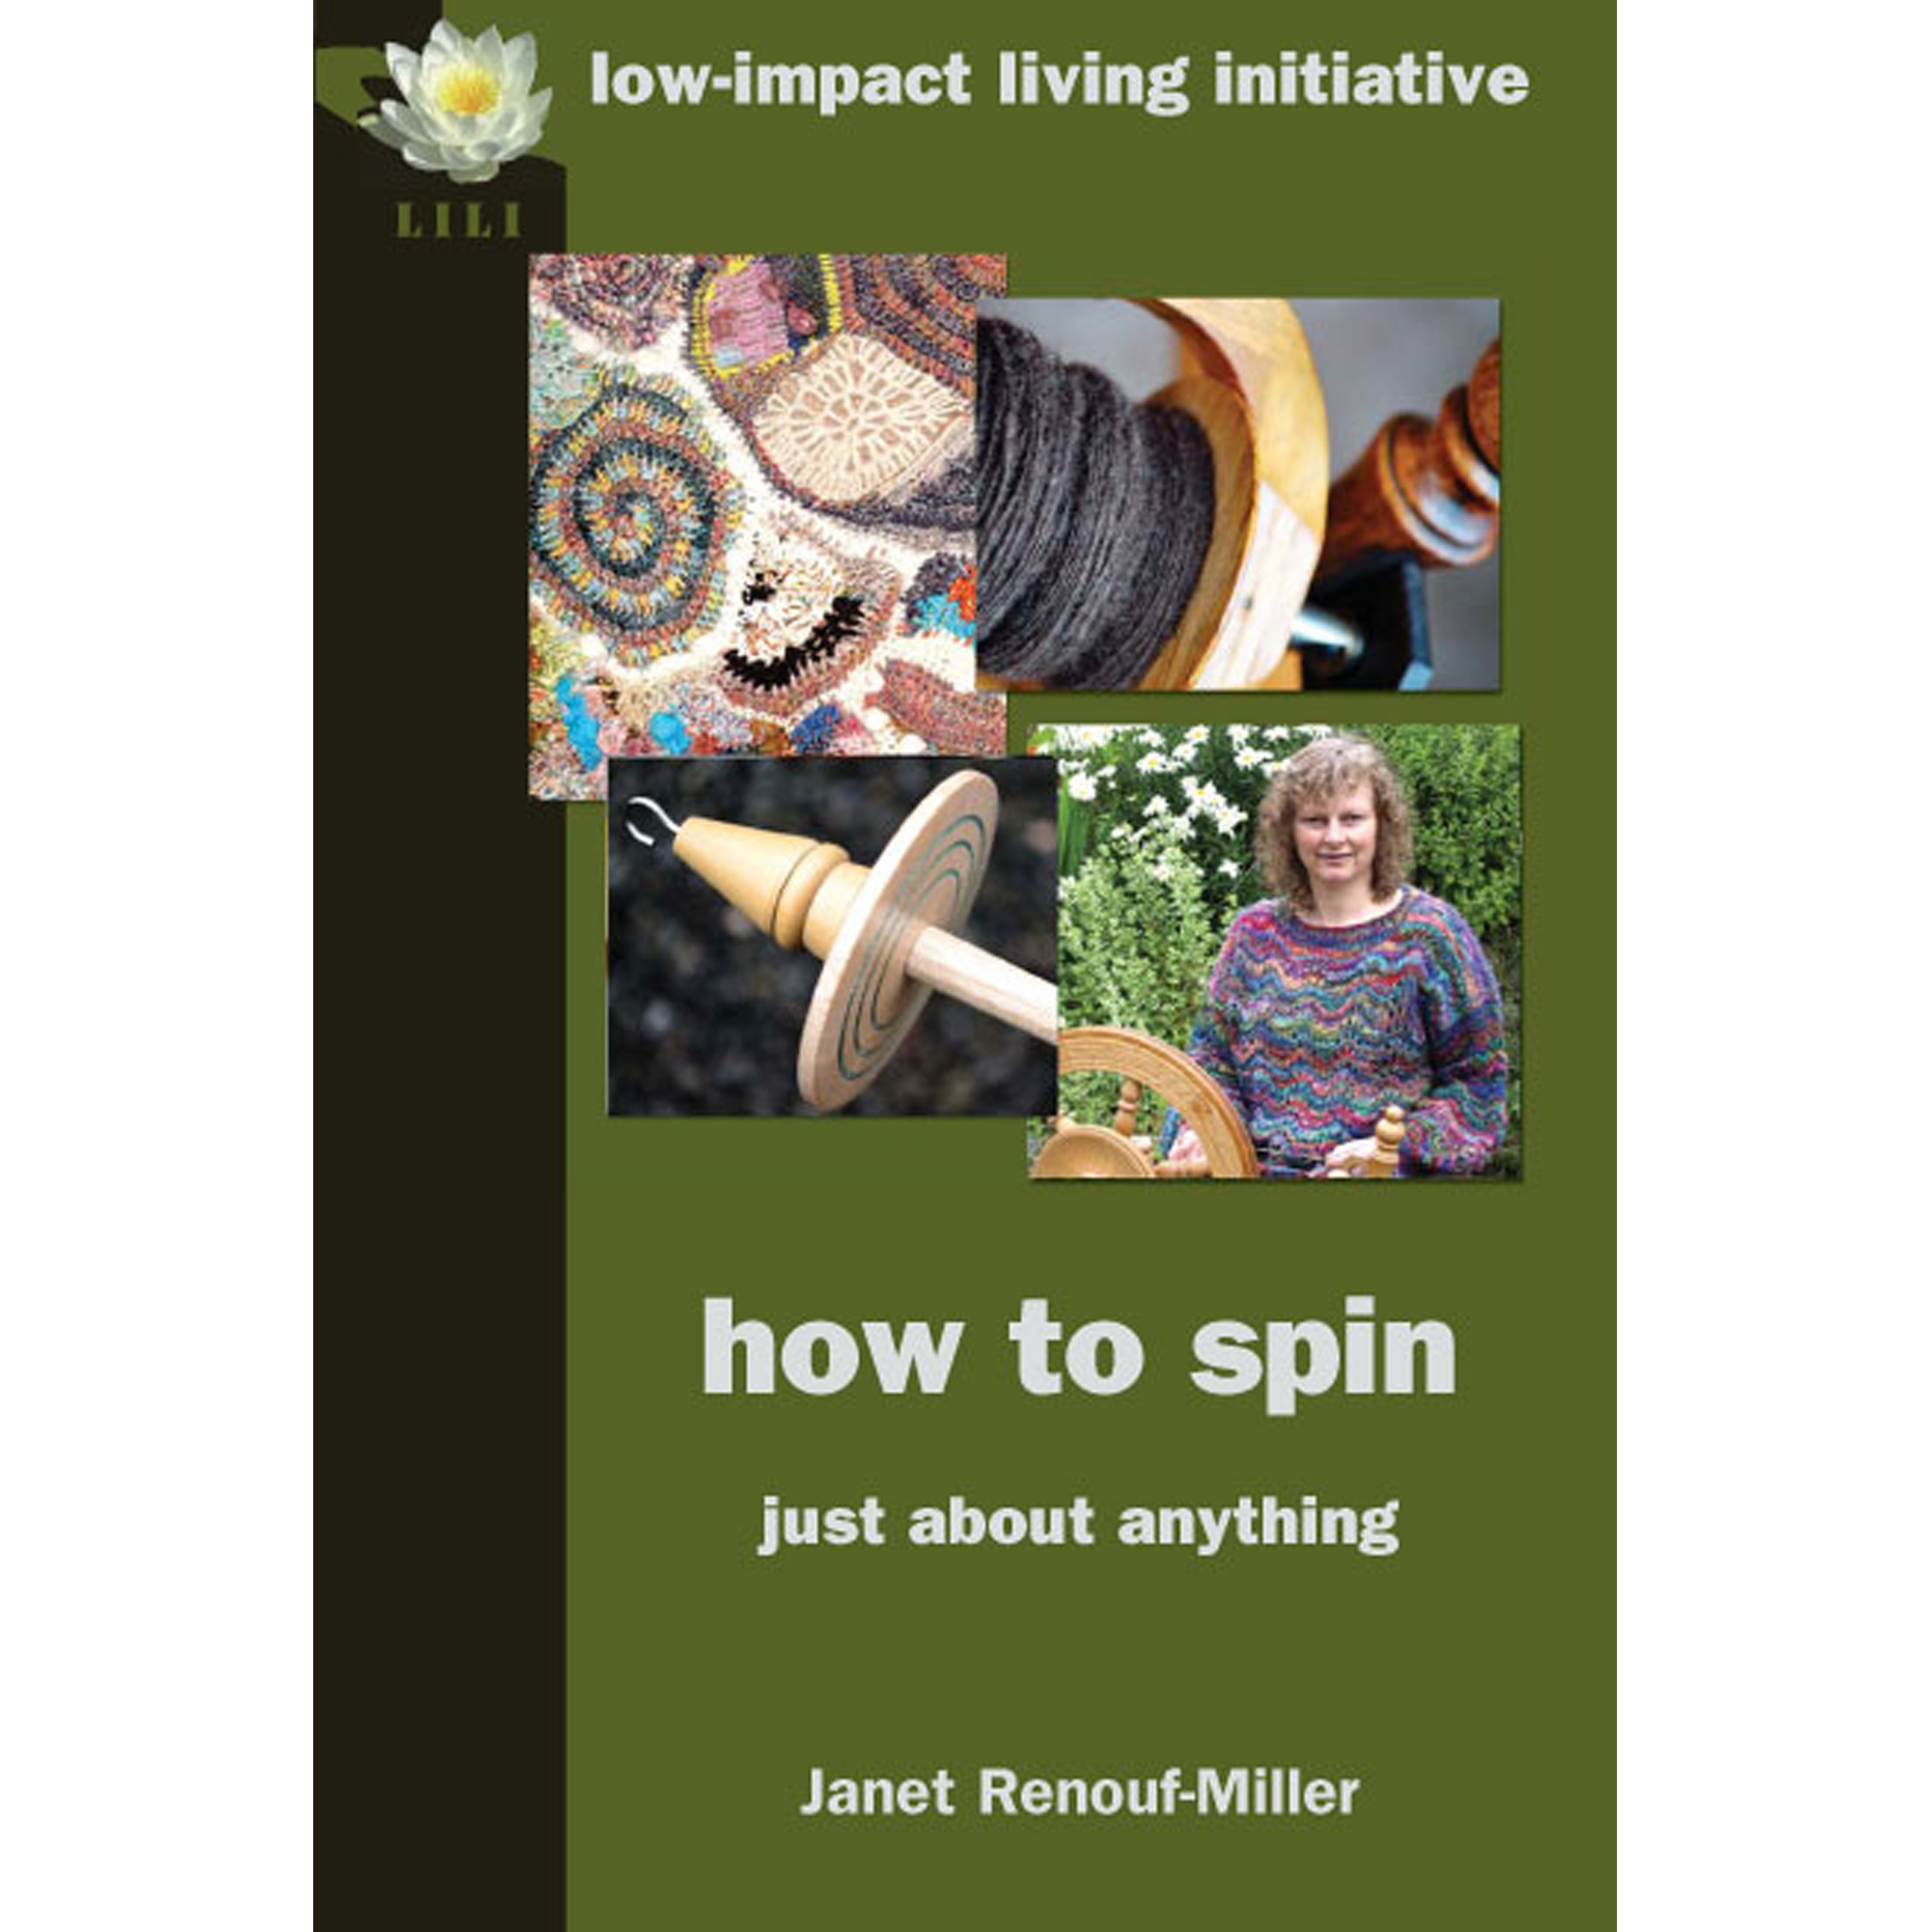 How to spin (just about anything)